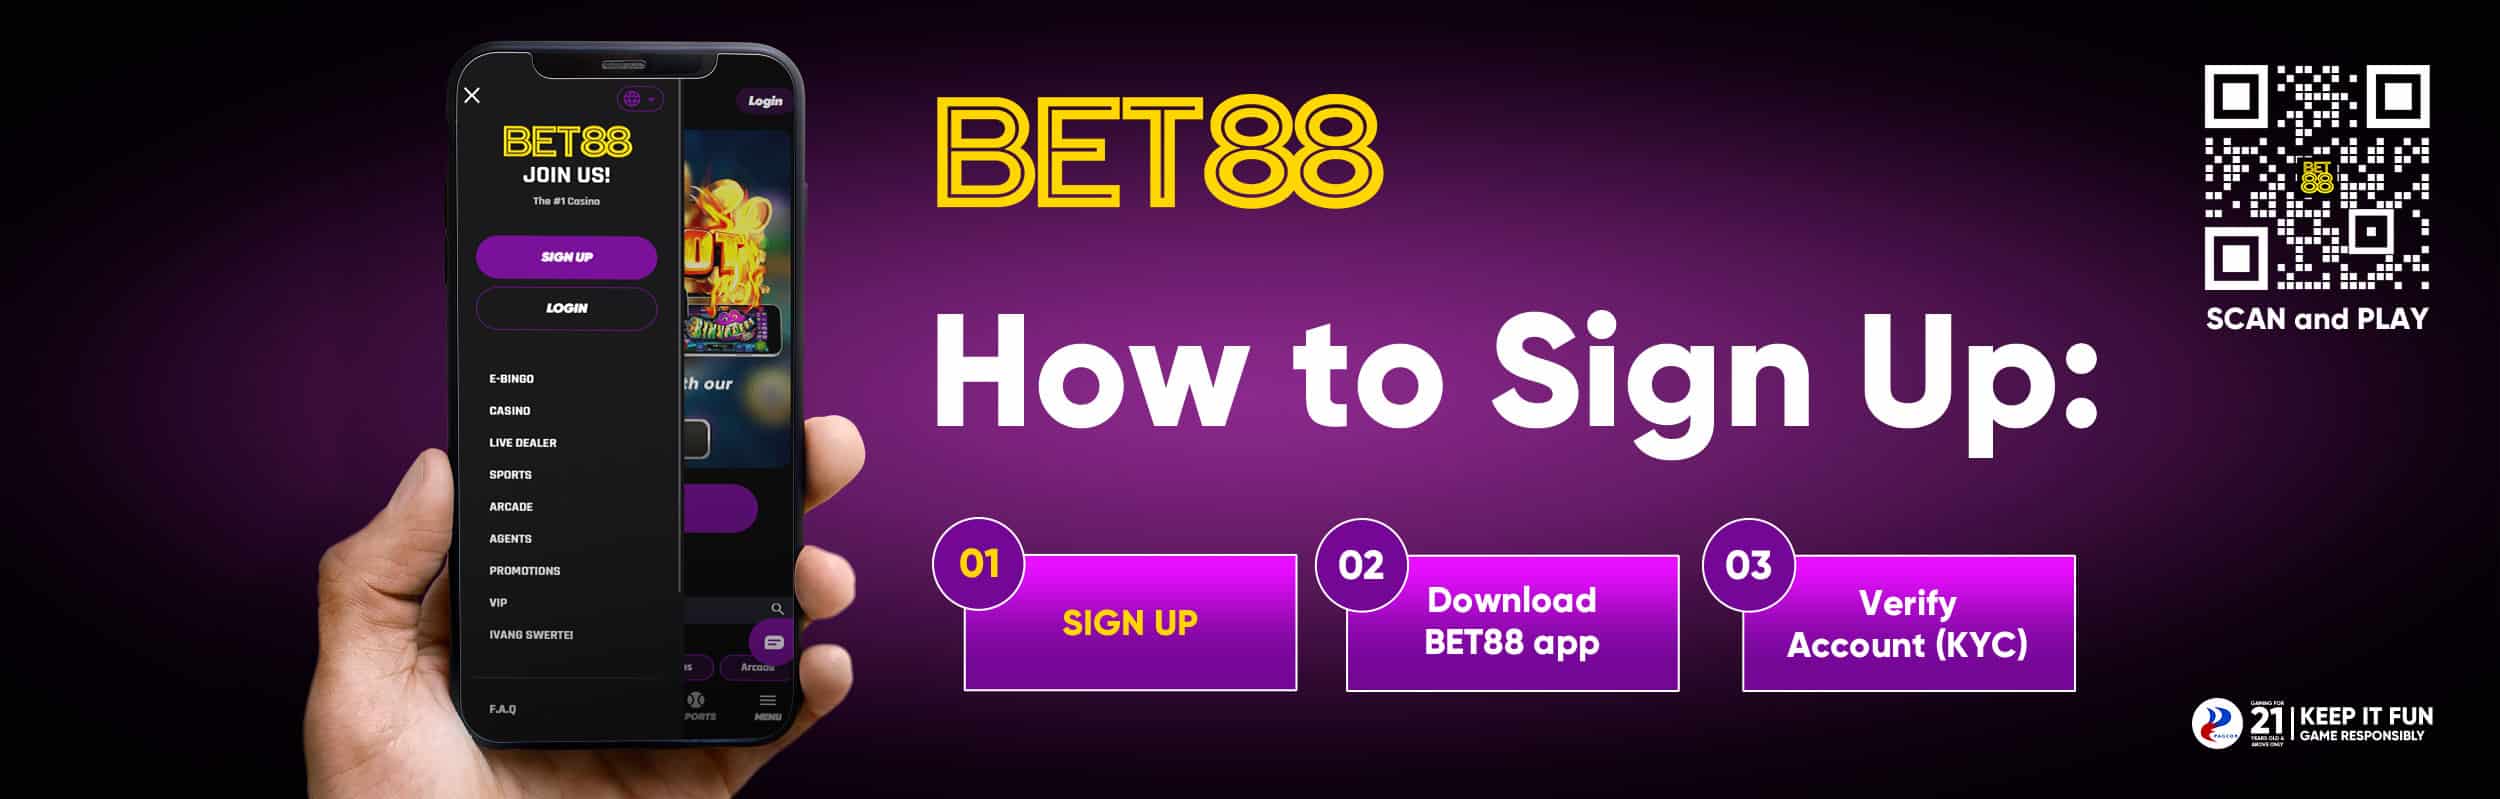 Bet88-How-To-Sign-Up-Banner